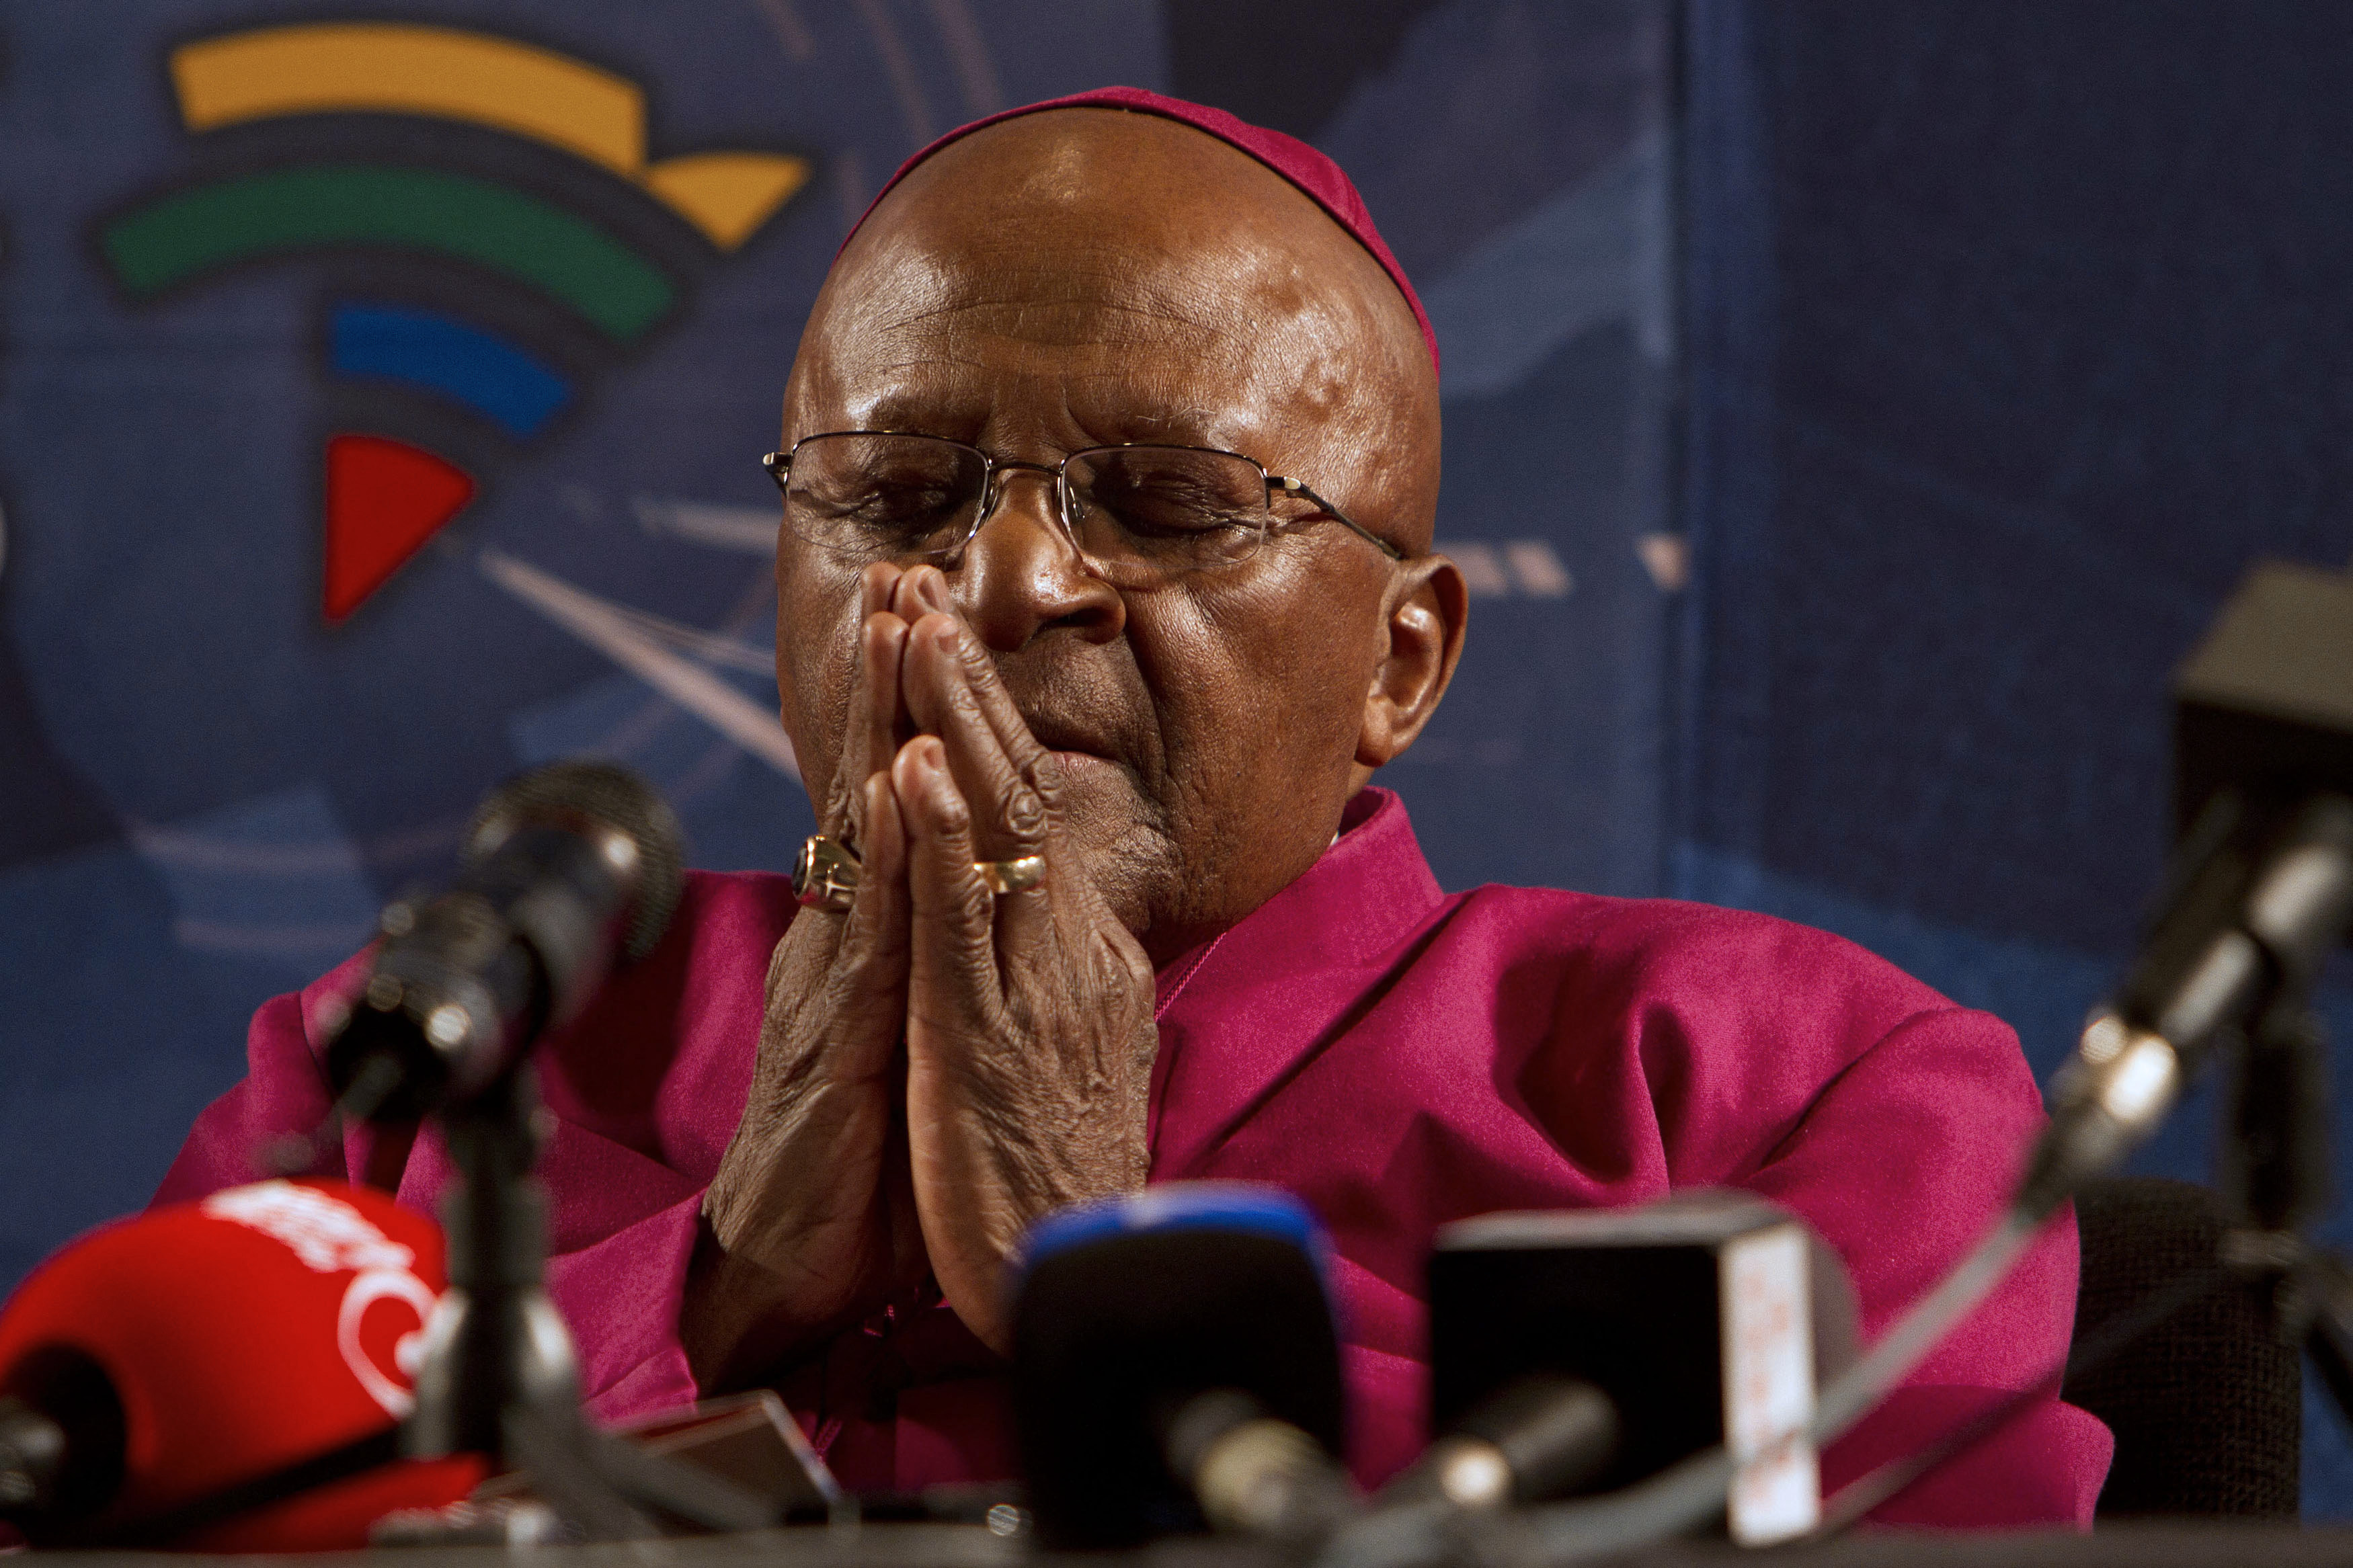 Archbishop Emeritus and Nobel Laureate Desmond Tutu pays tribute to Nelson Mandela during a news conference in Cape Town